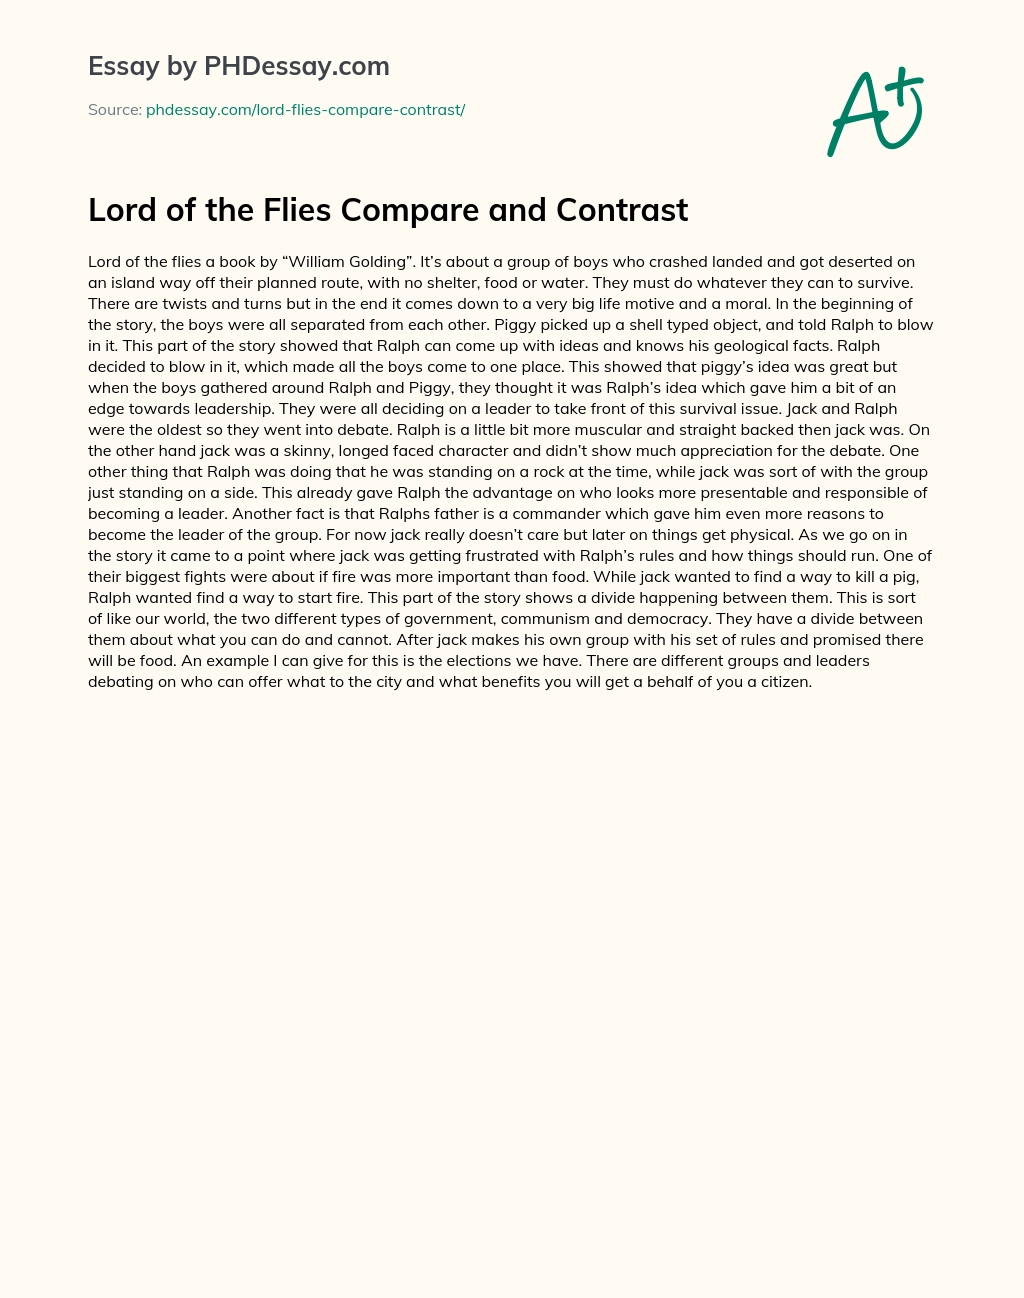 Lord of the Flies Compare and Contrast essay